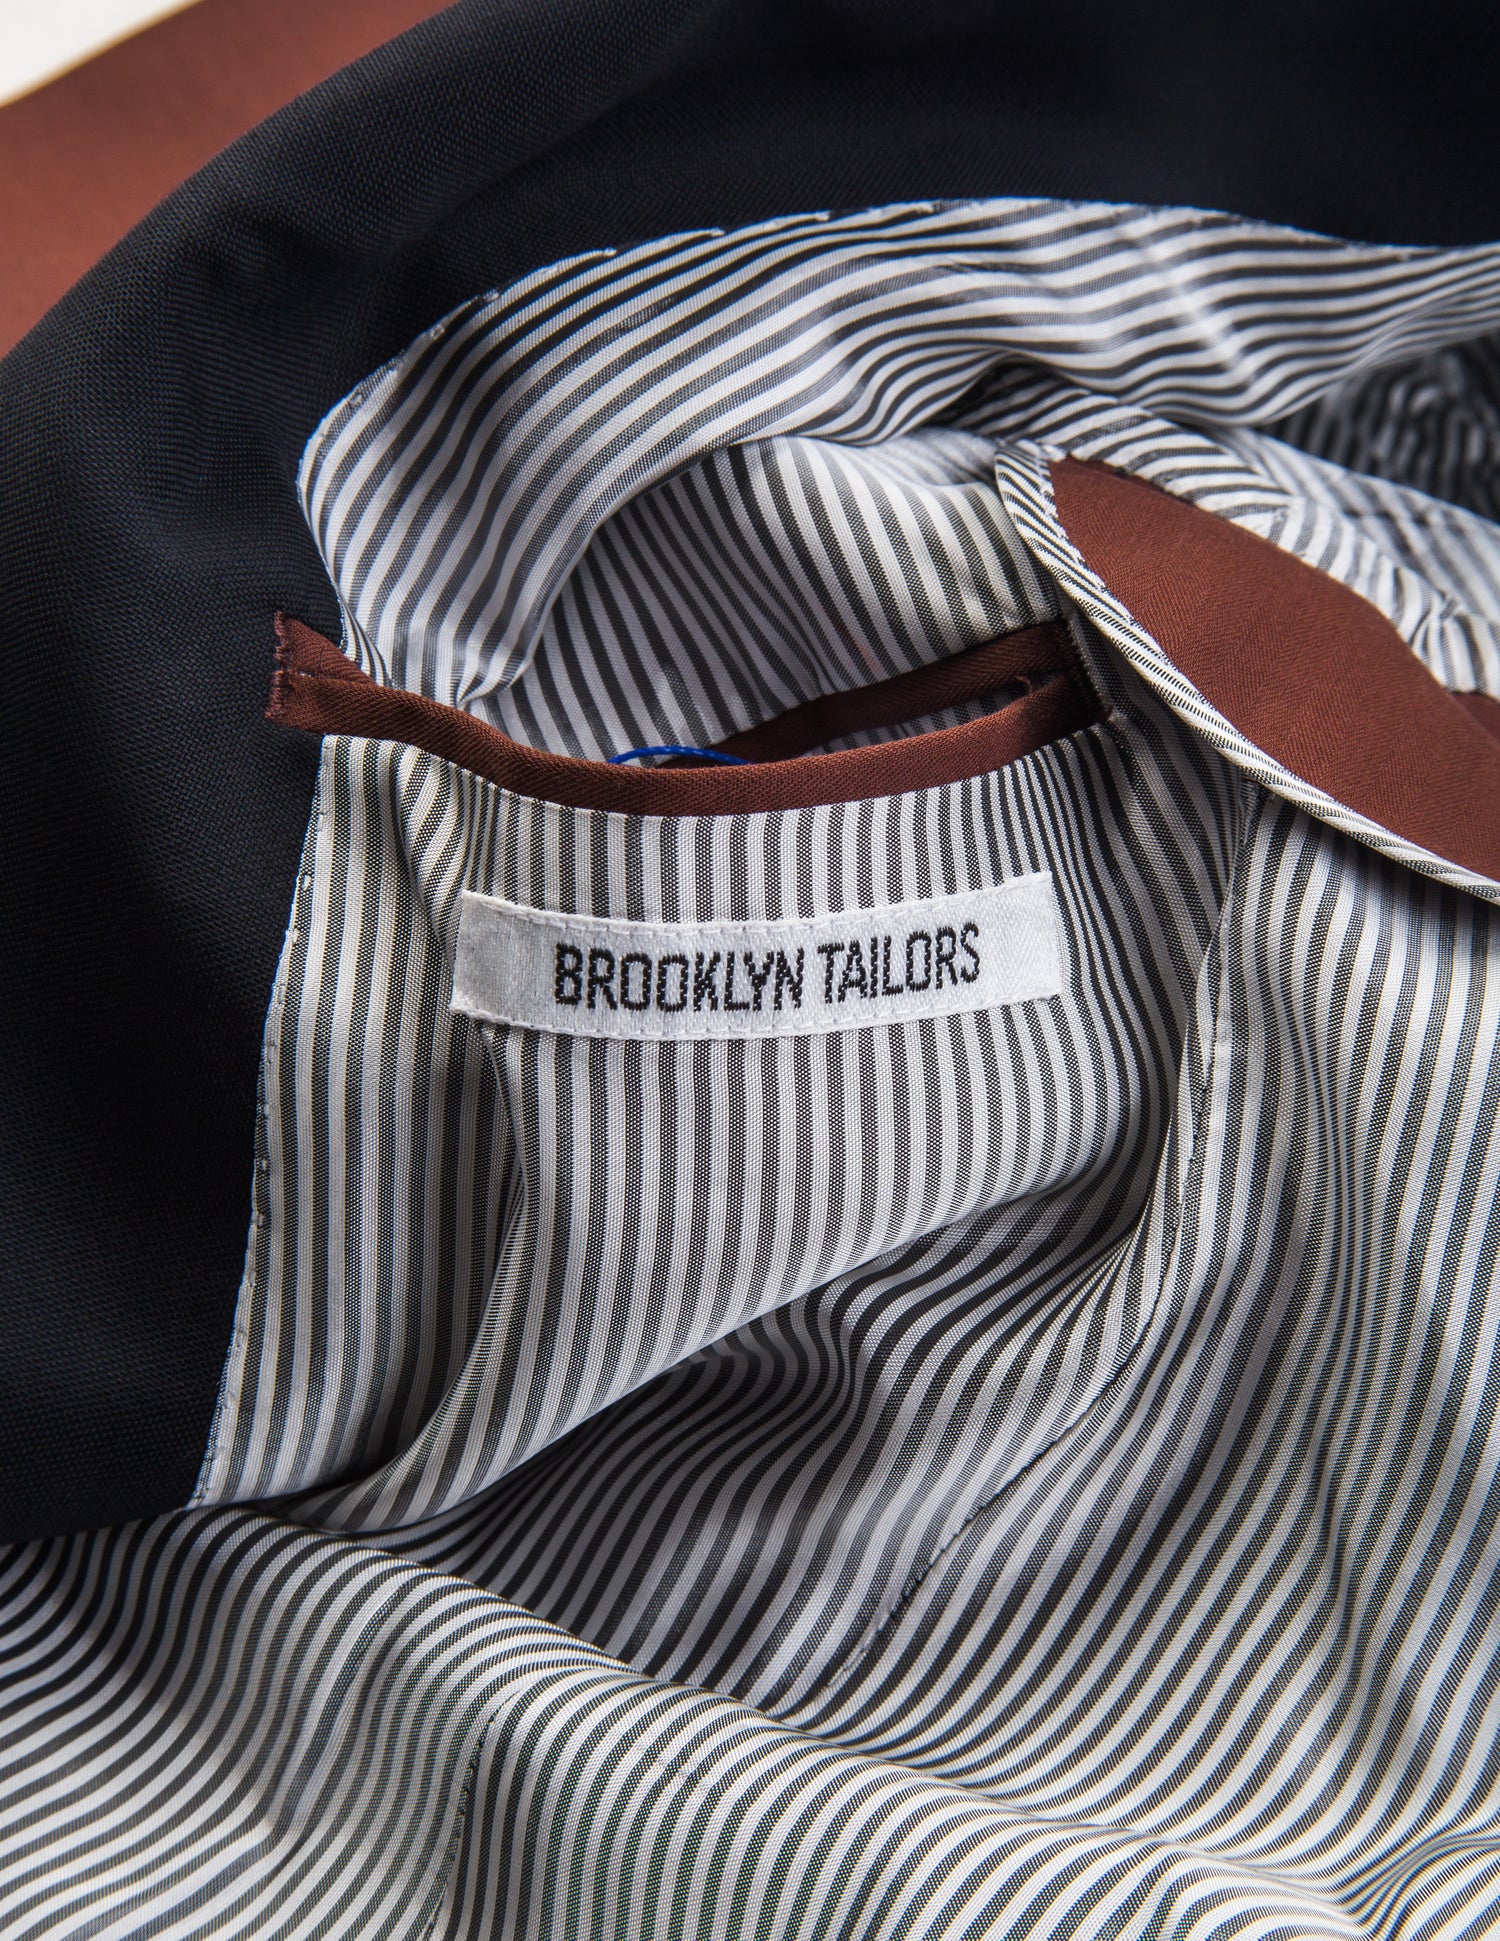 Detail shot of Brooklyn Tailors BKT50 Shawl Collar Dinner Jacket in Herringbone Wool/Cotton - Brick showing lining and Brooklyn Tailors label on the interior of the jacket